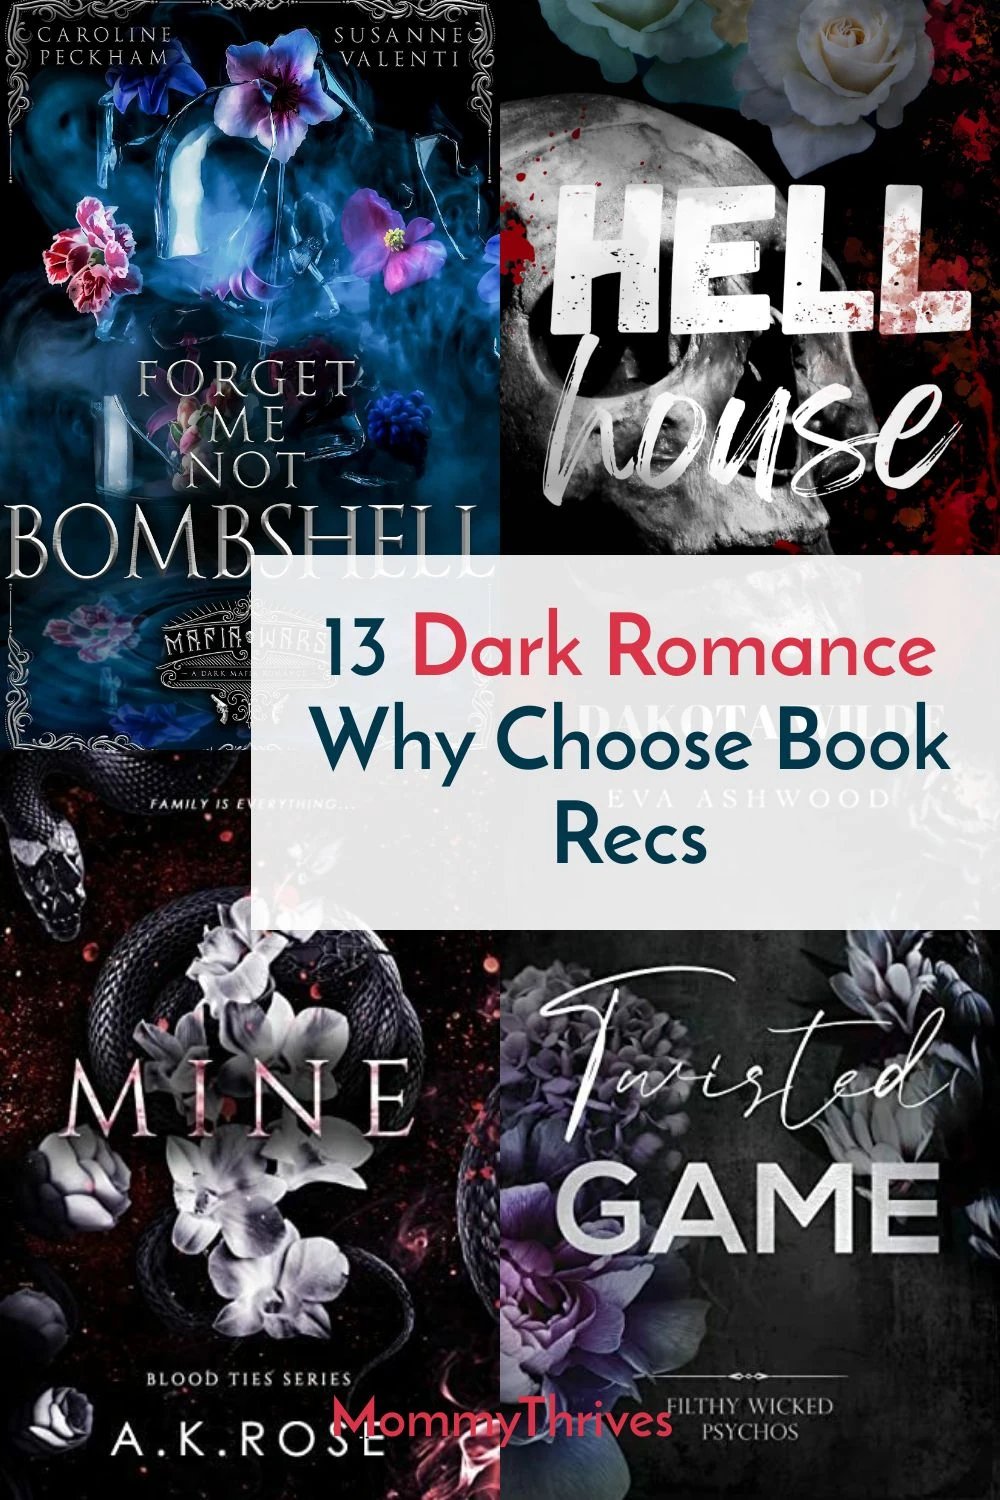 Dark Romance Book Recommendations - Why Choose Book Recommendations - Book Recs for Why Choose Romance